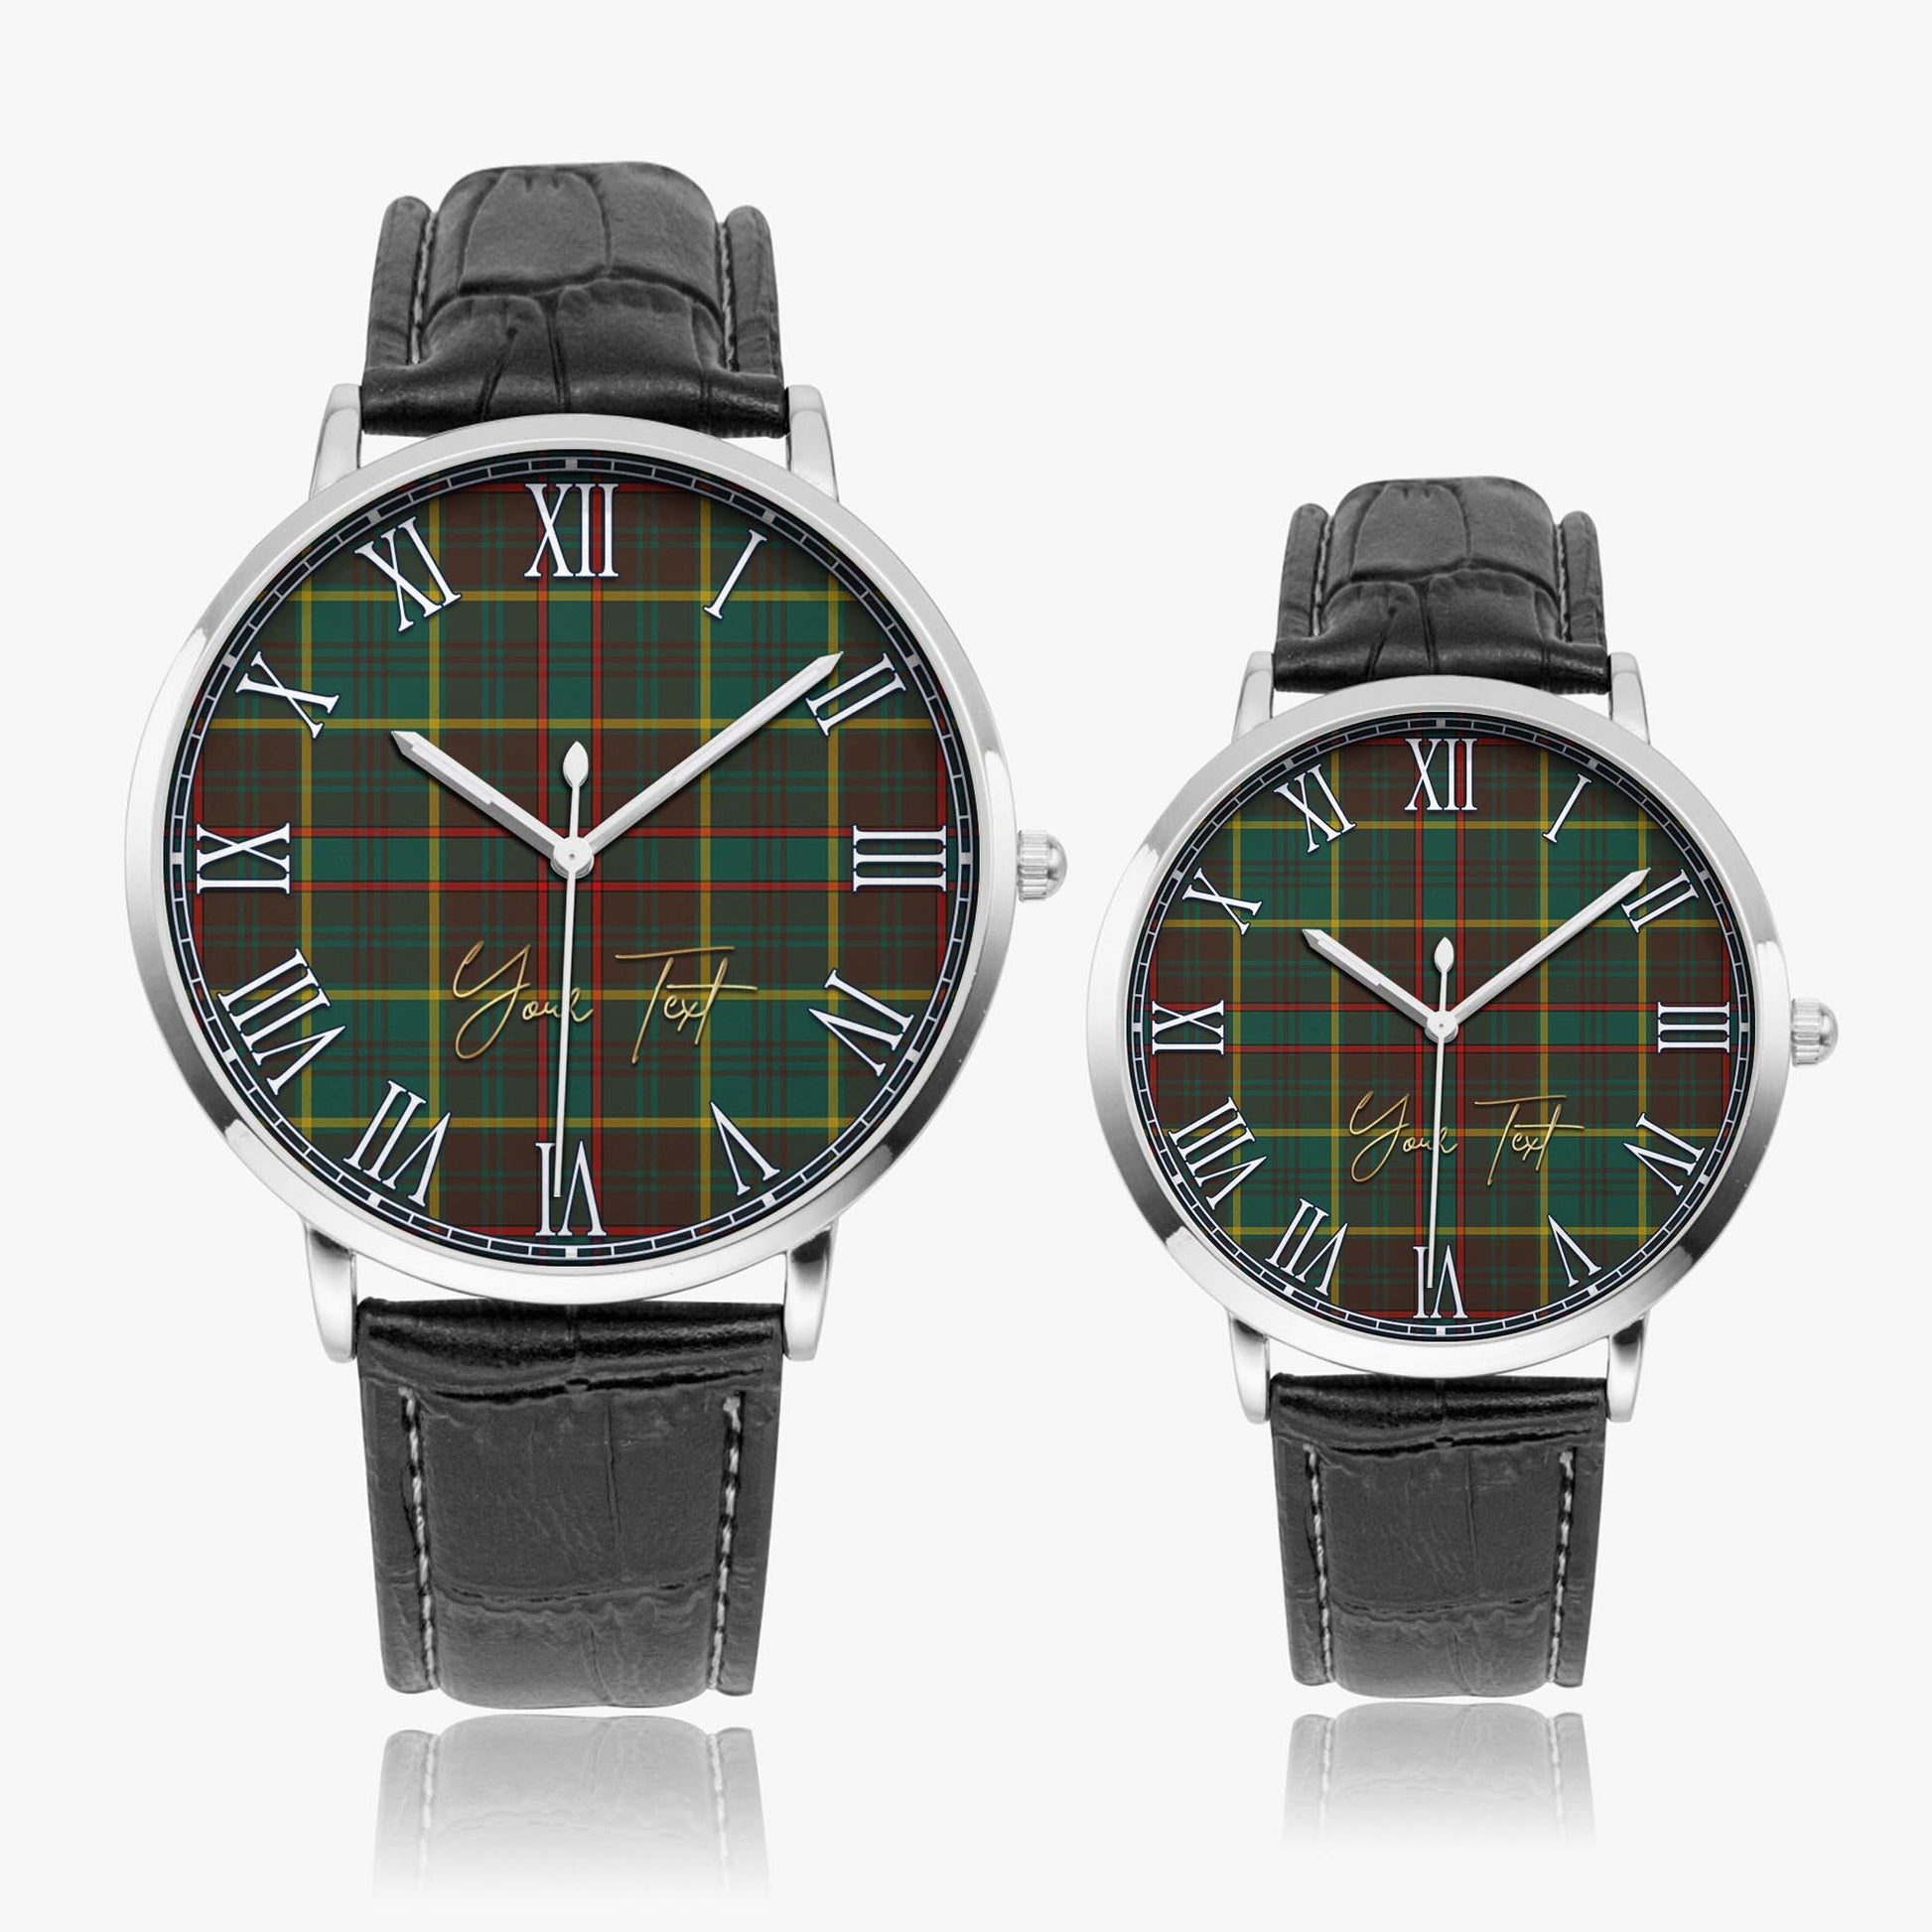 Ontario Province Canada Tartan Personalized Your Text Leather Trap Quartz Watch Ultra Thin Silver Case With Black Leather Strap - Tartanvibesclothing